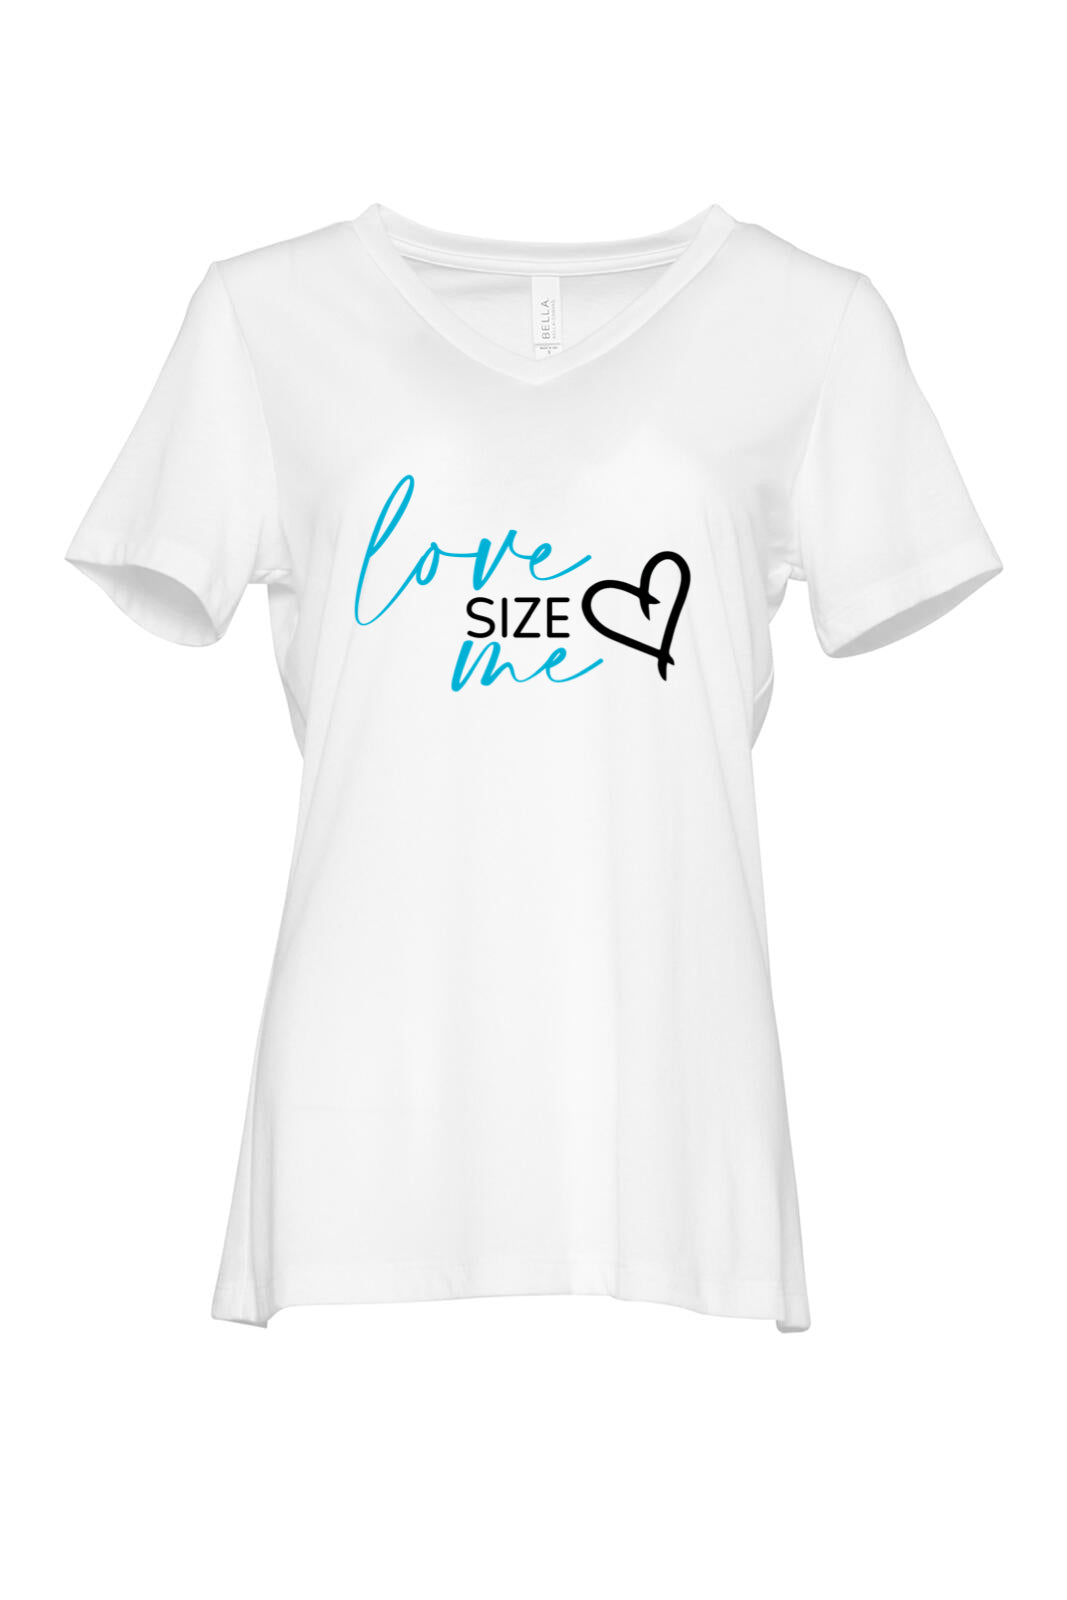 LOVE SIZE ME - Relaxed Triblend V Neck Tee